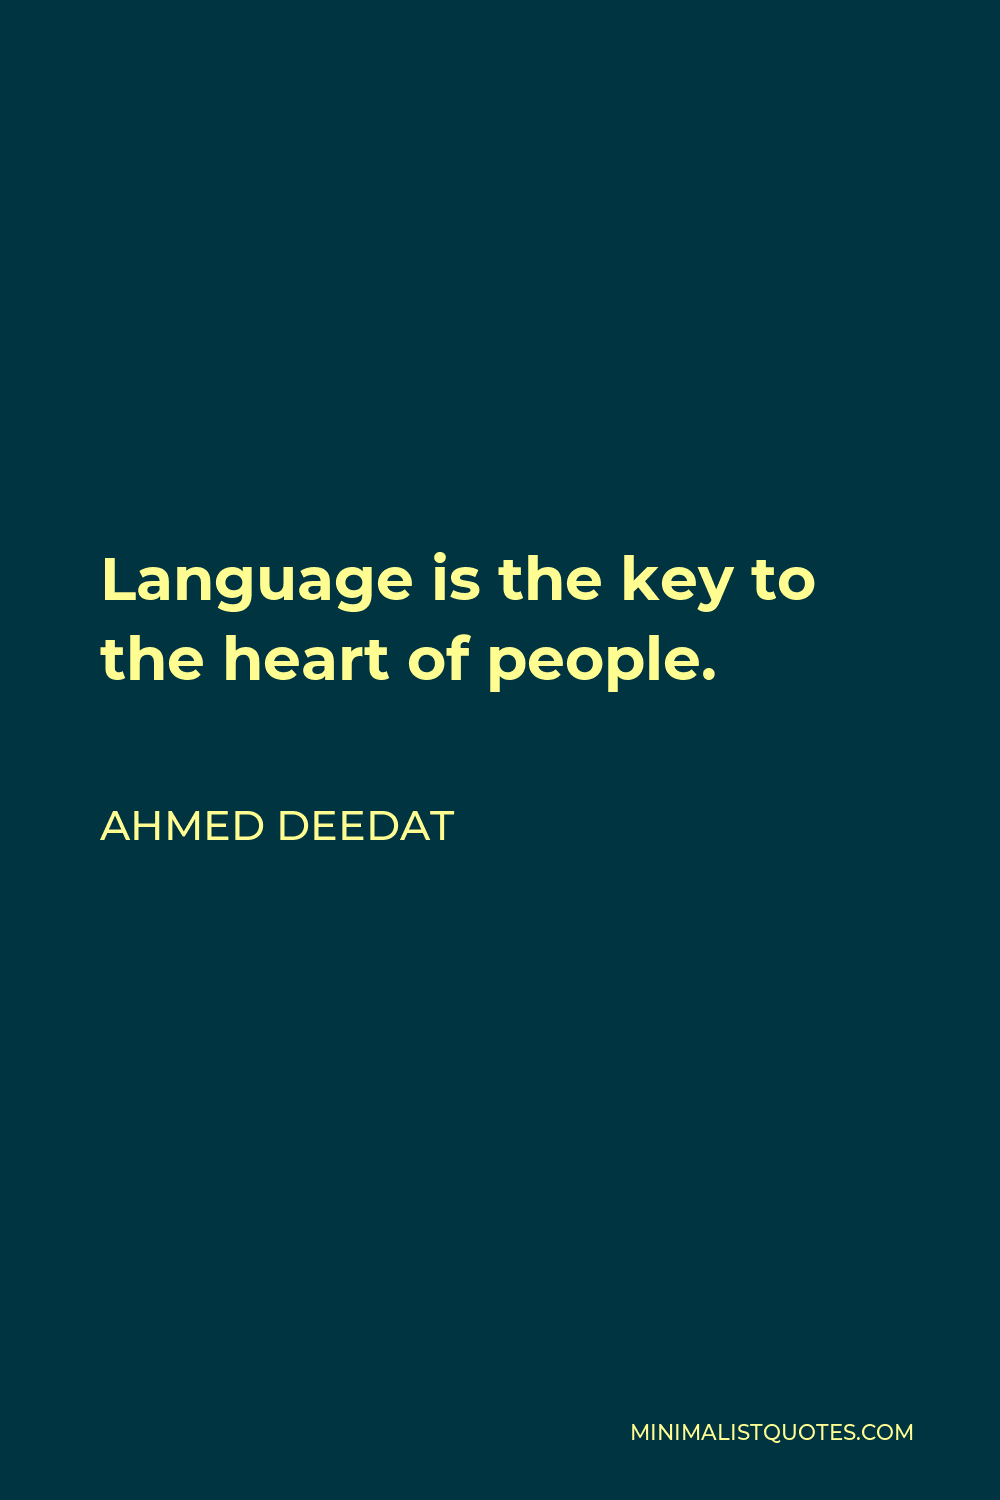 Ahmed Deedat Quote - Language is the key to the heart of people.